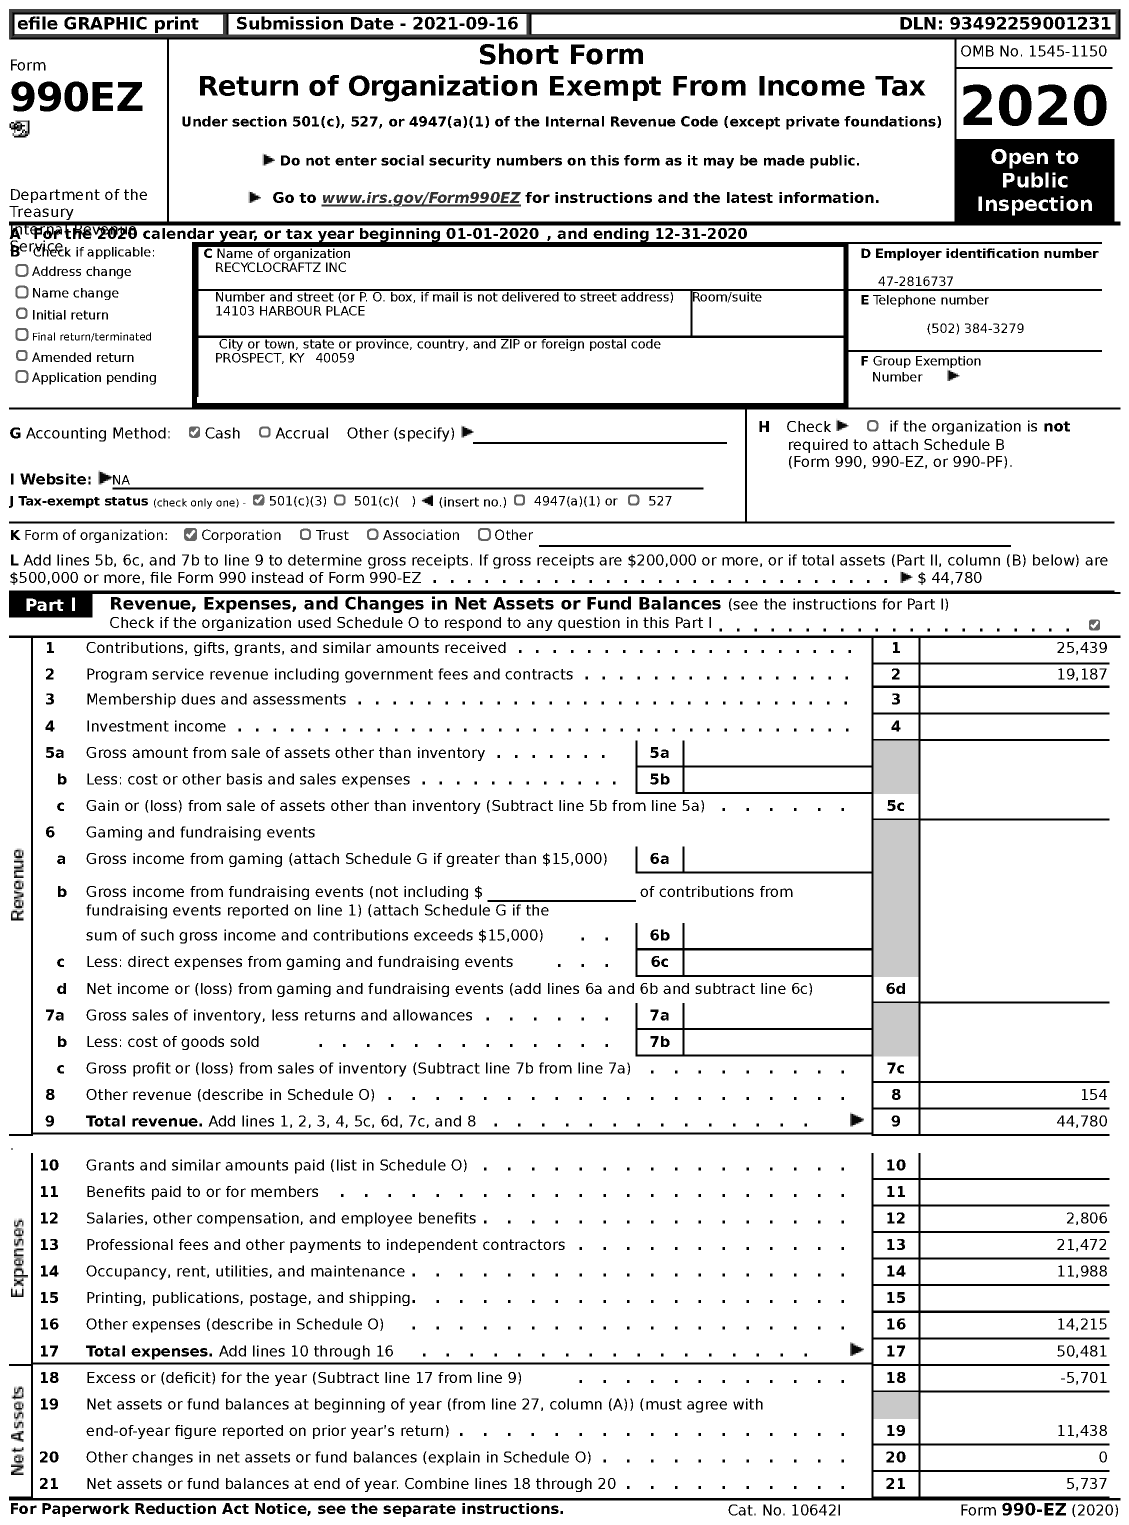 Image of first page of 2020 Form 990EZ for Recylcocraftz